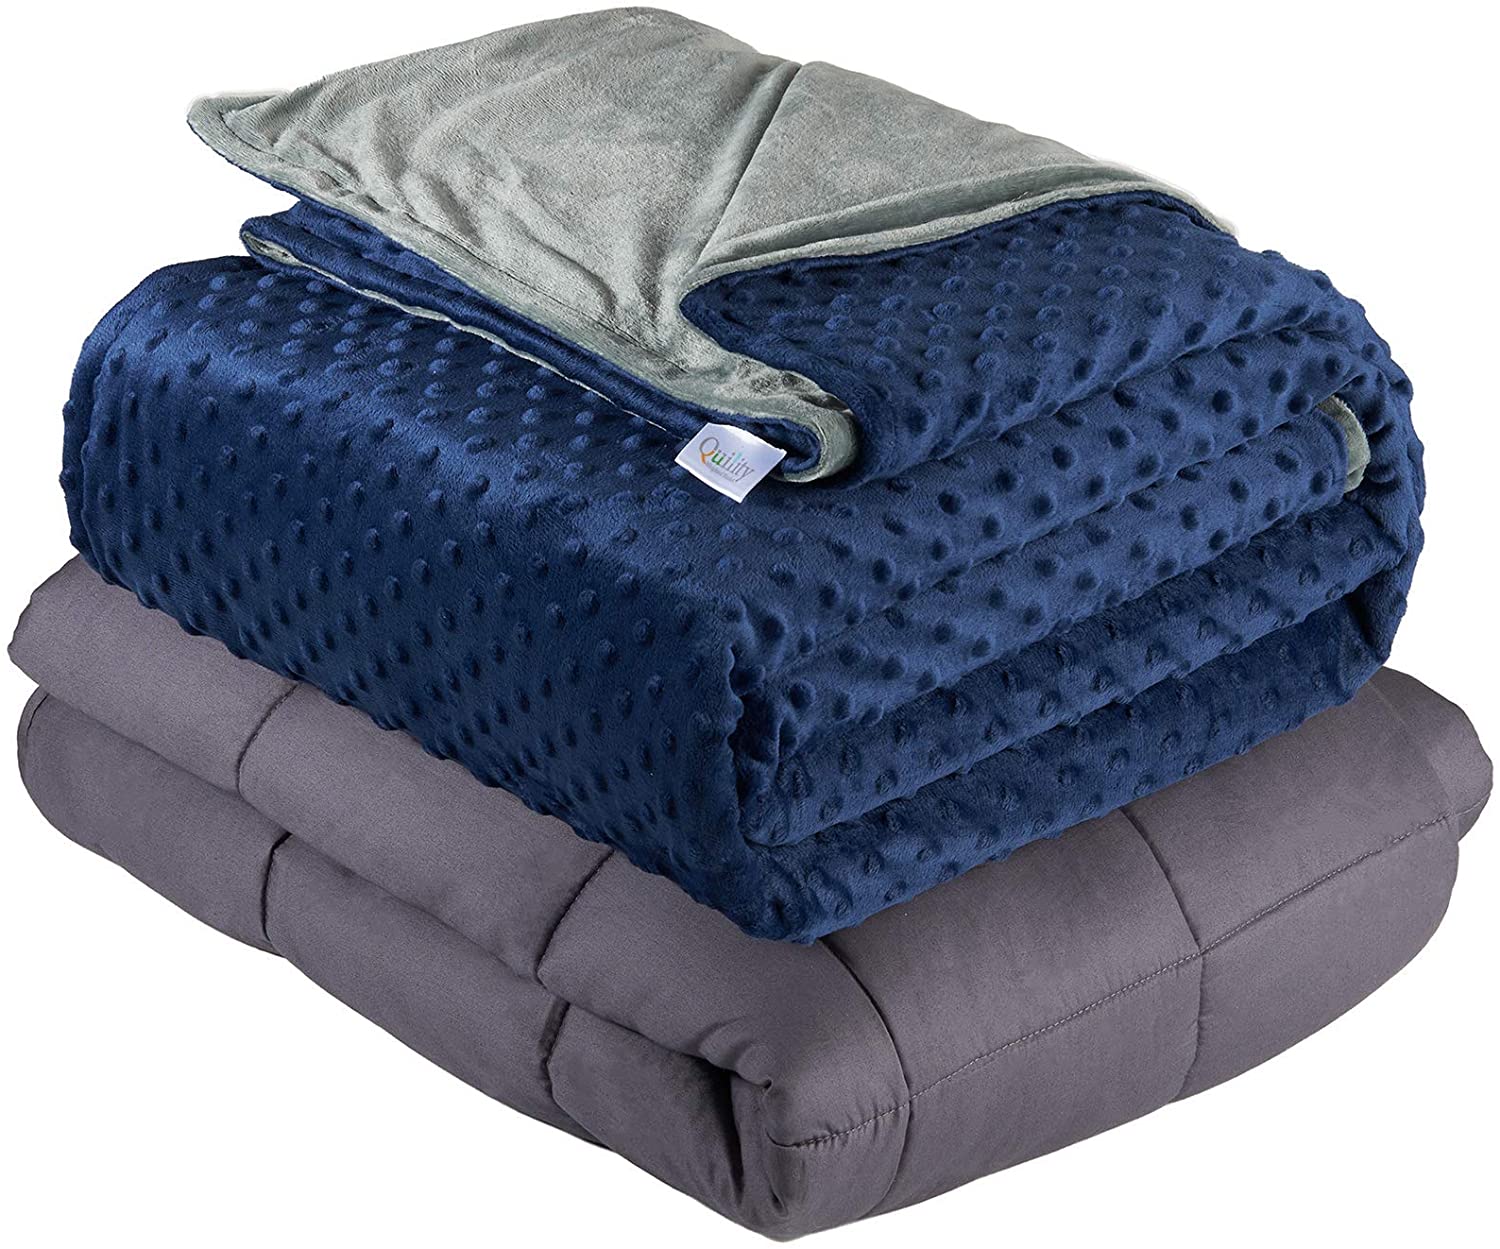 The Best Weighted Blanket | March 2022